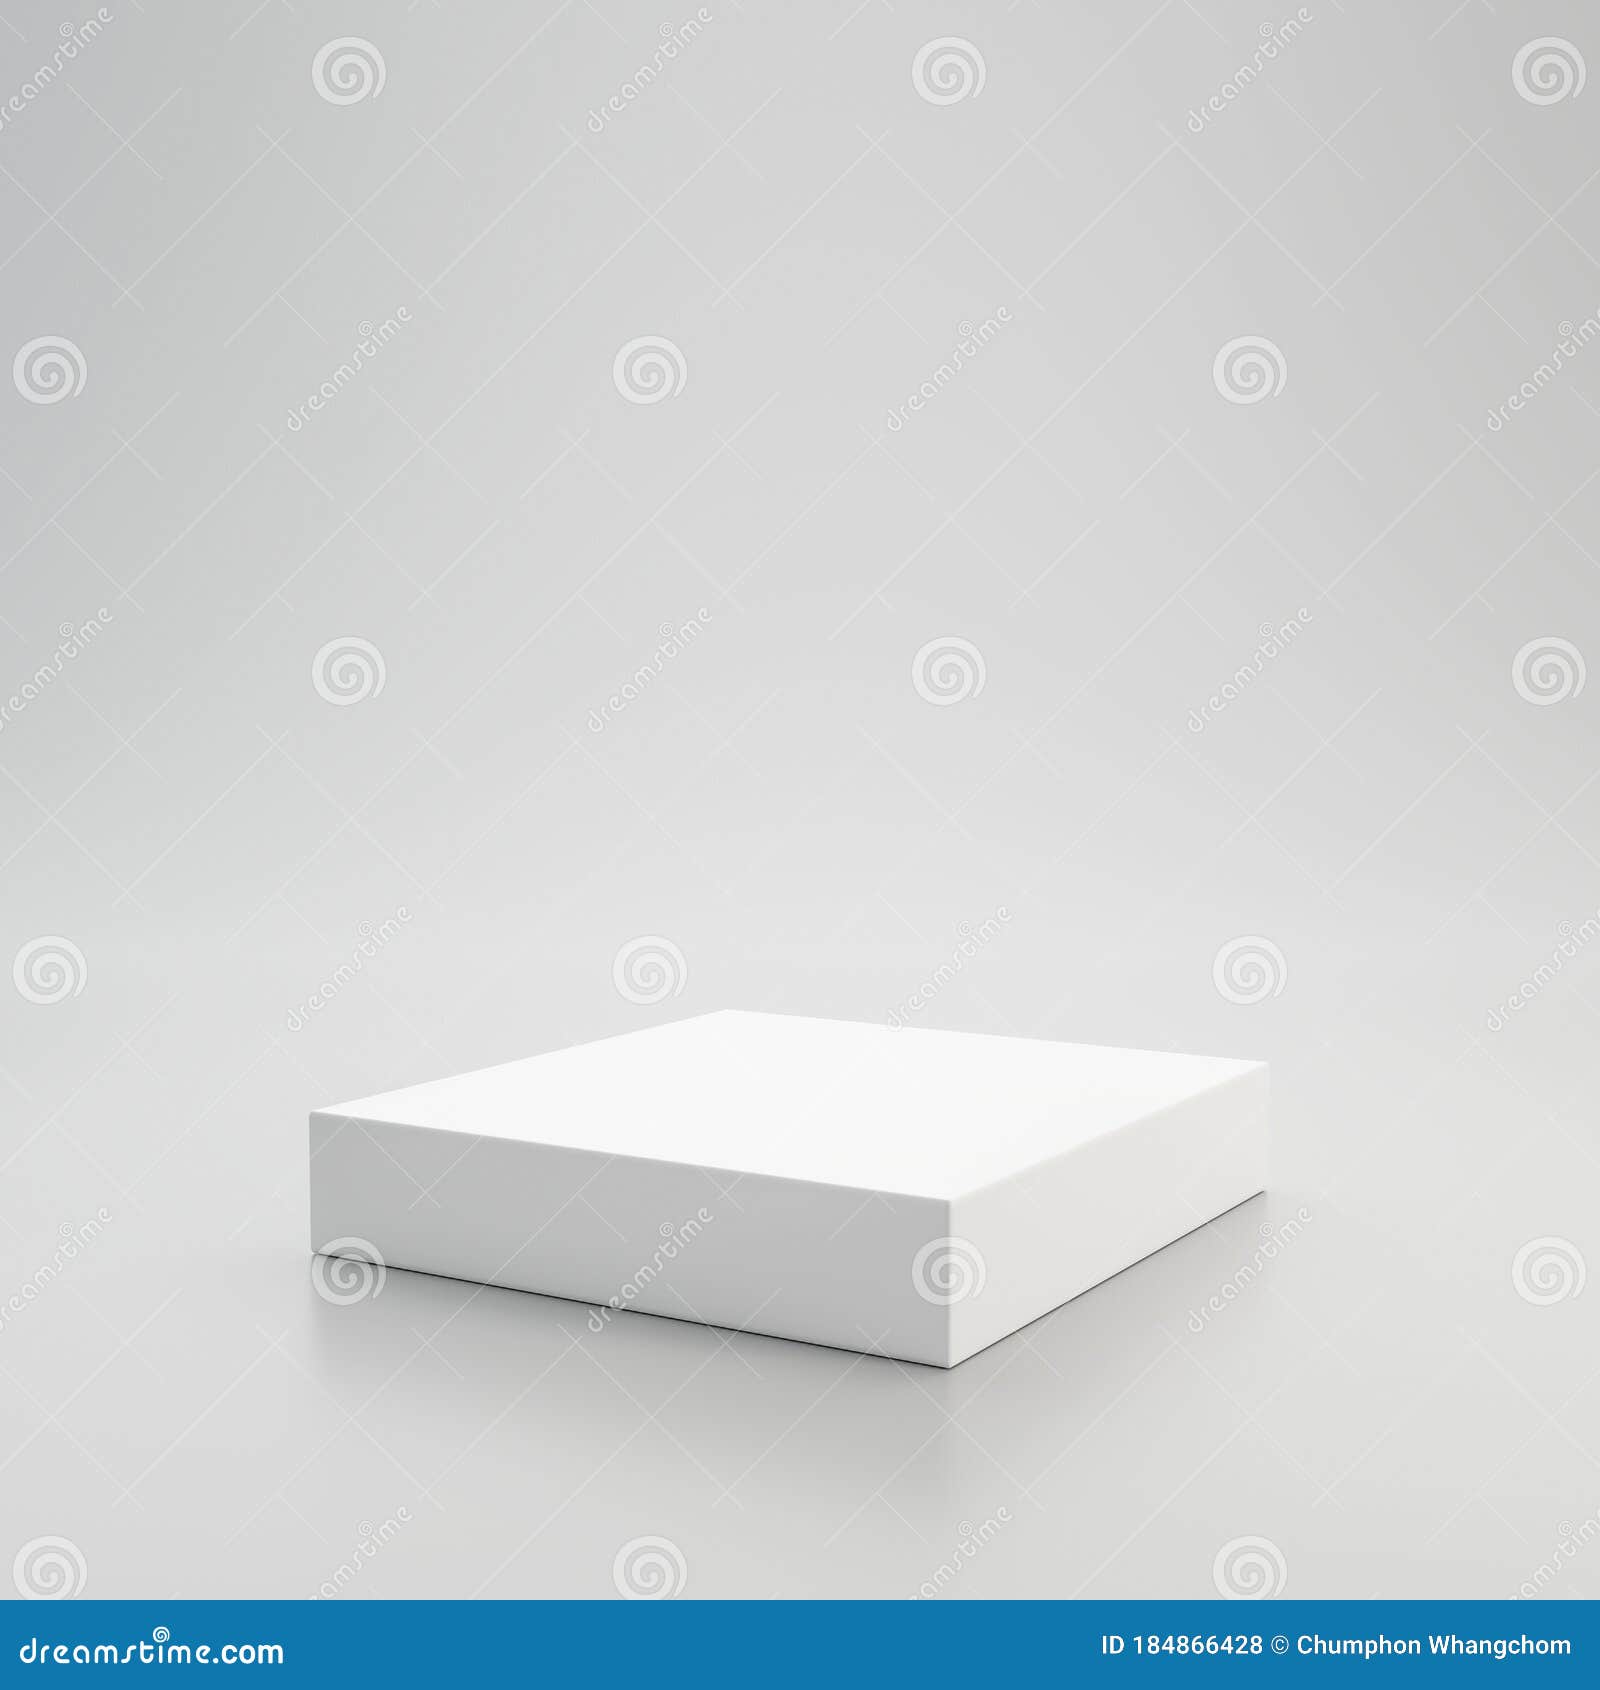 white showcase podium or product display on white background with pedestal stand concept. blank product shelf standing backdrop.